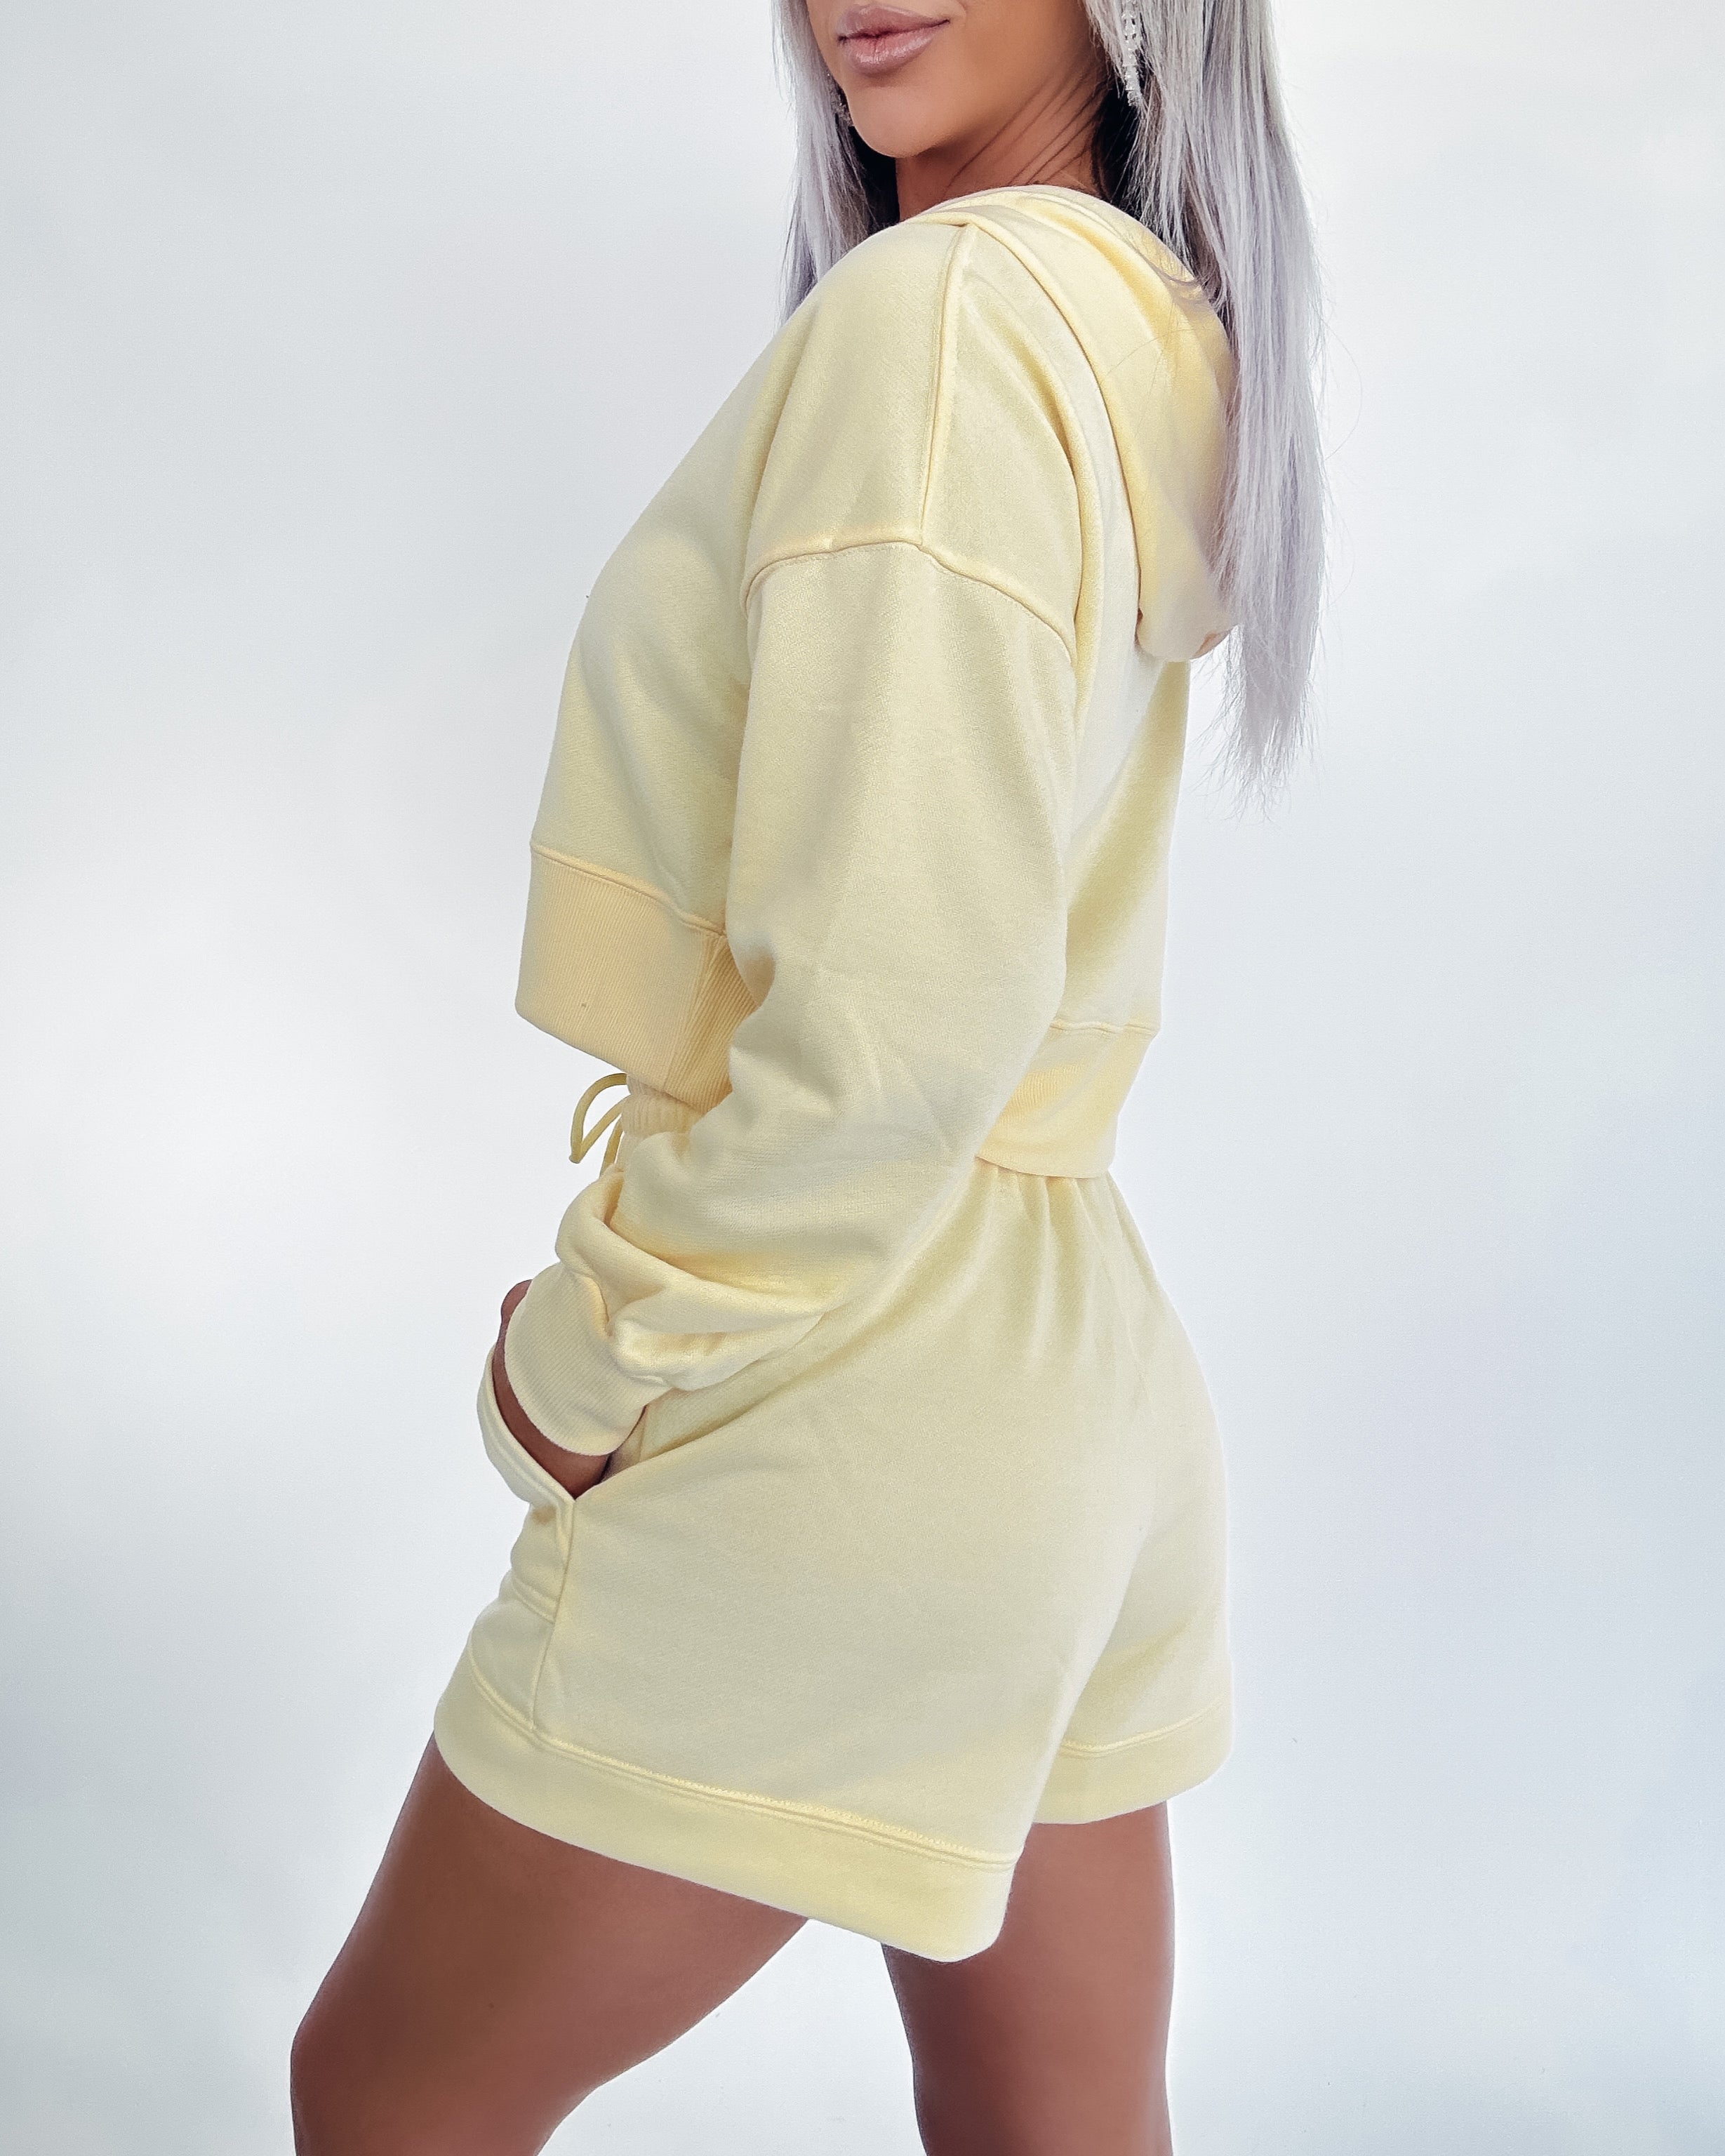 Take It Easy Hooded Zip Up/Shorts Set- Yellow